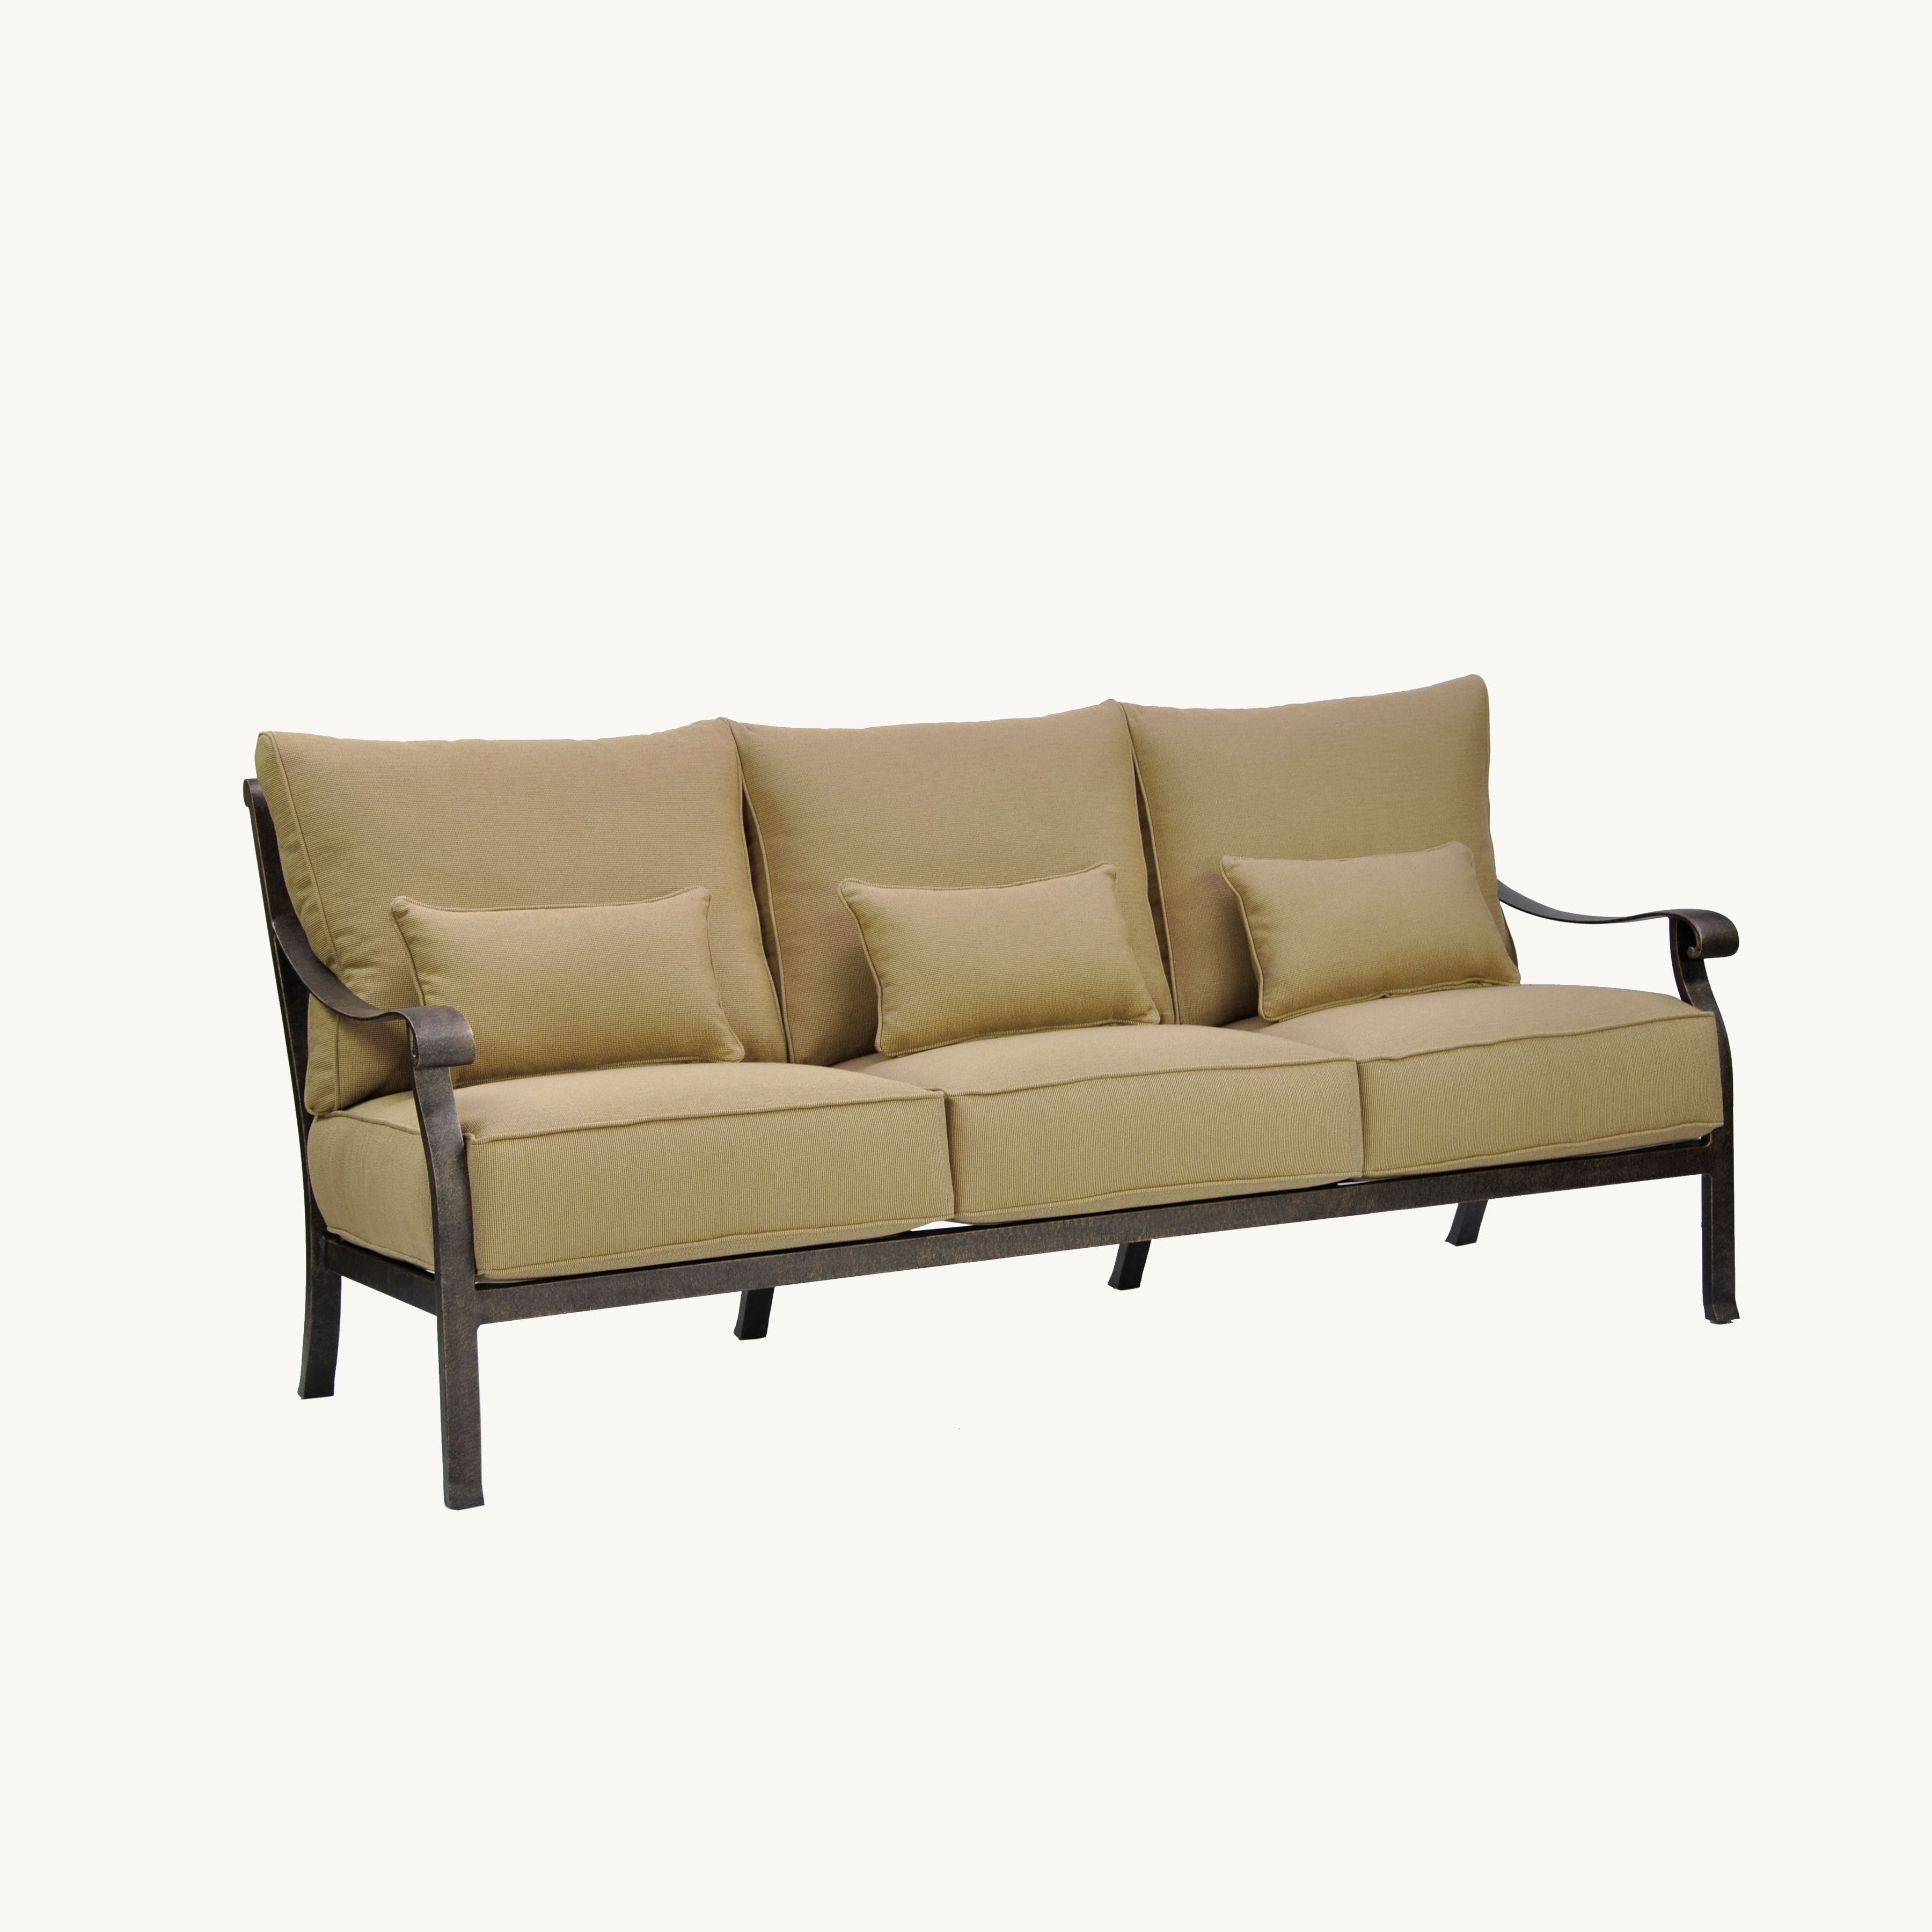 Madrid Cushioned Sofa By Castelle